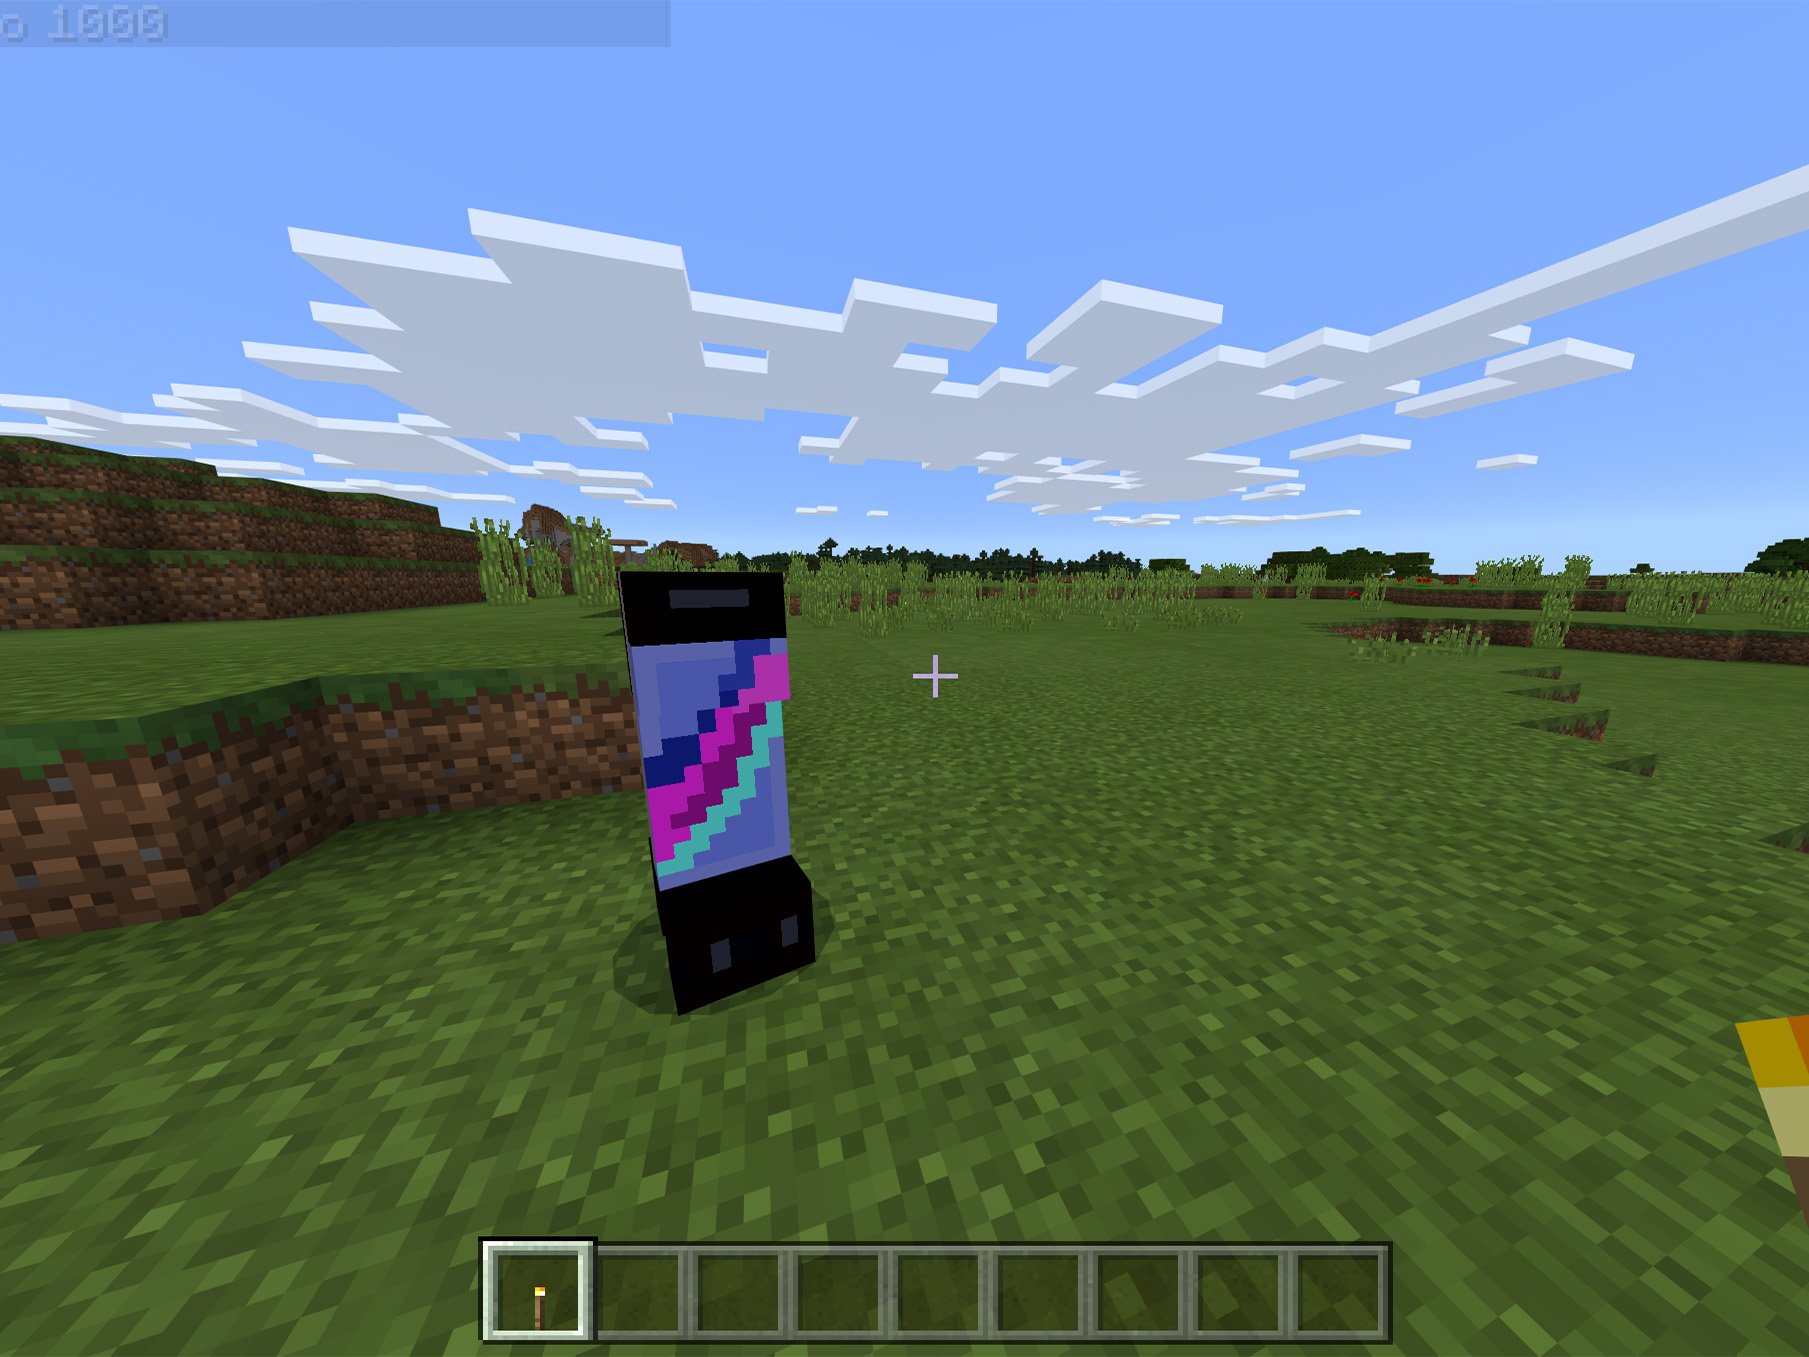 How to get custom skins in Minecraft Education Edition